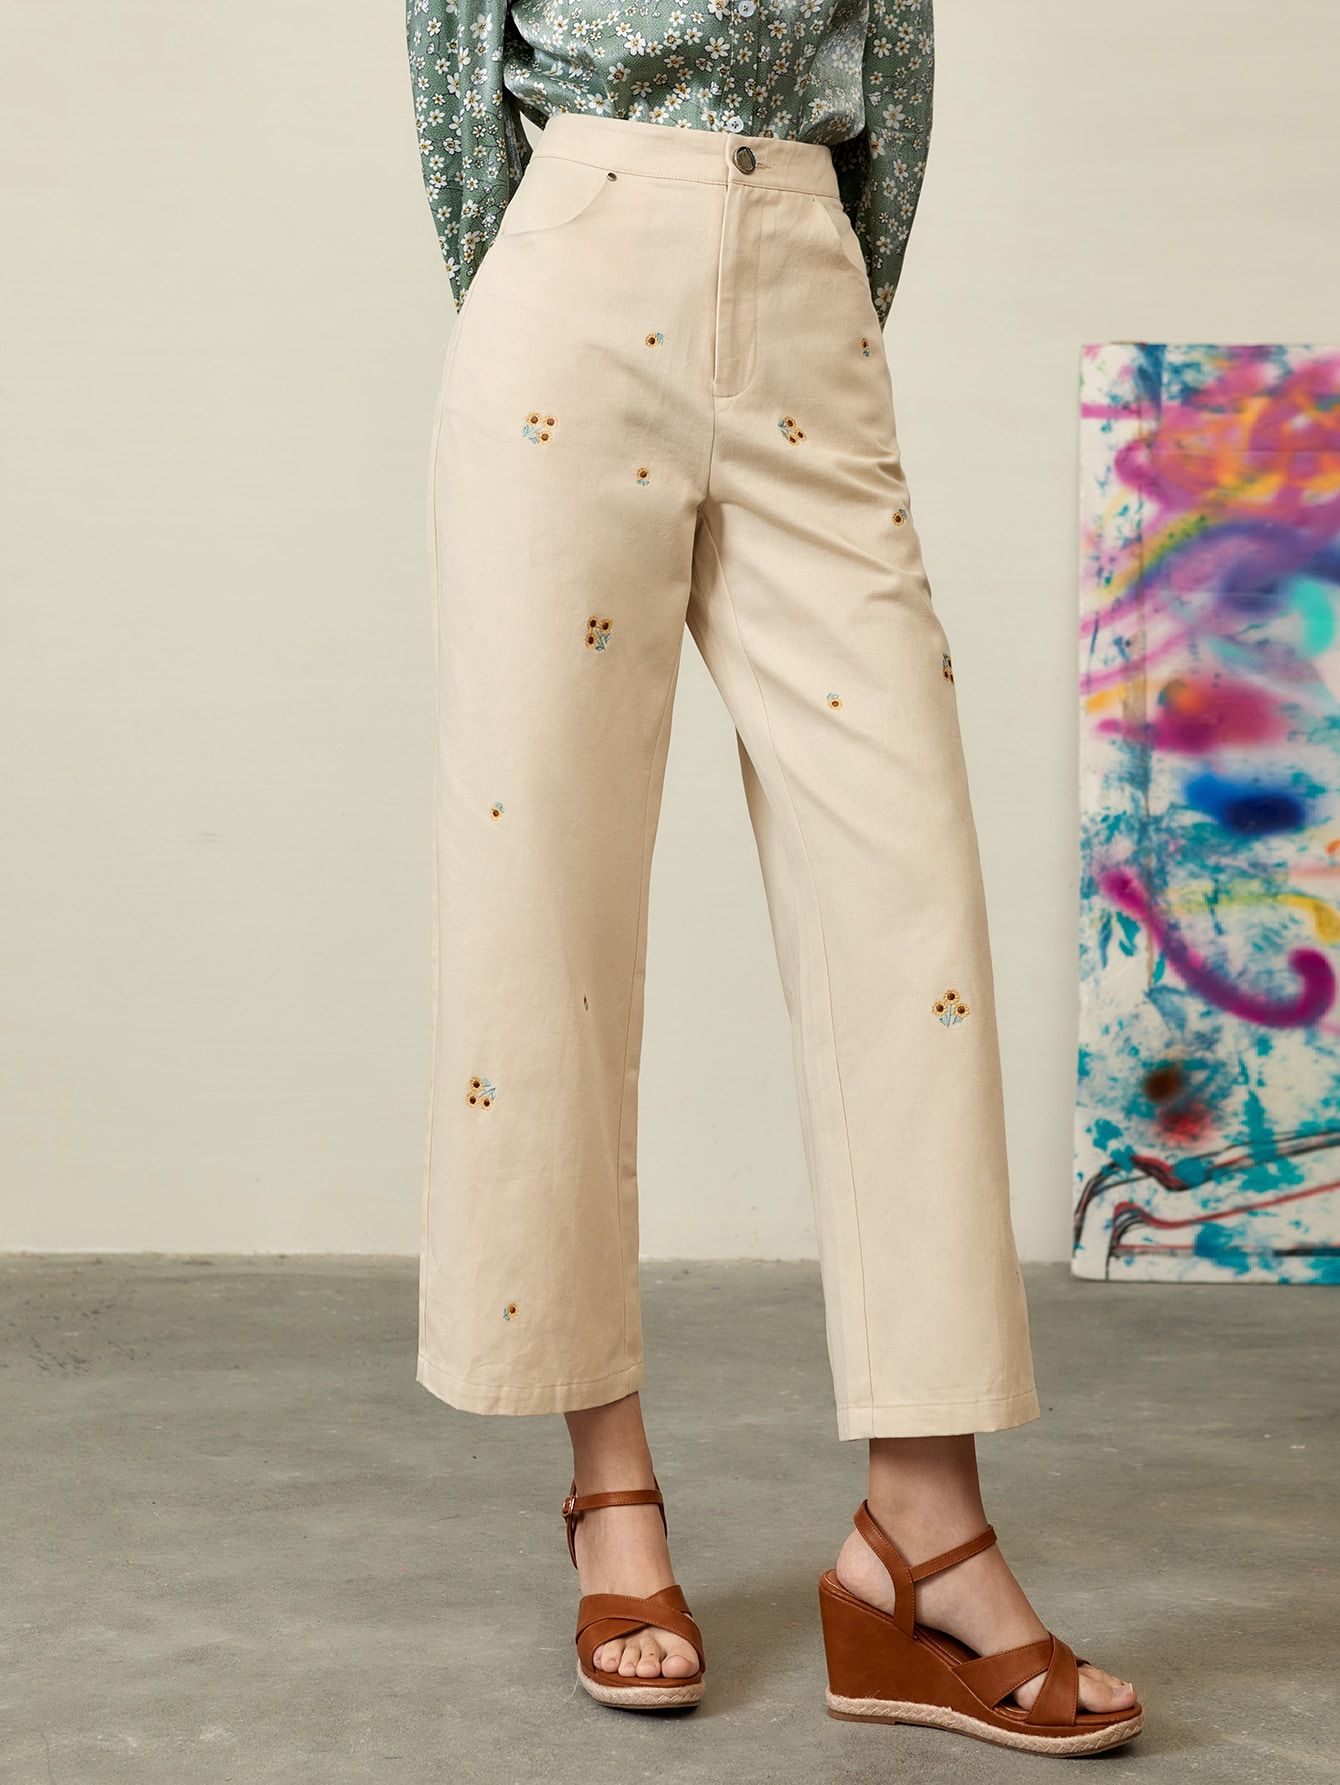 SHEIN Floral Embroidered Pants | SHEIN